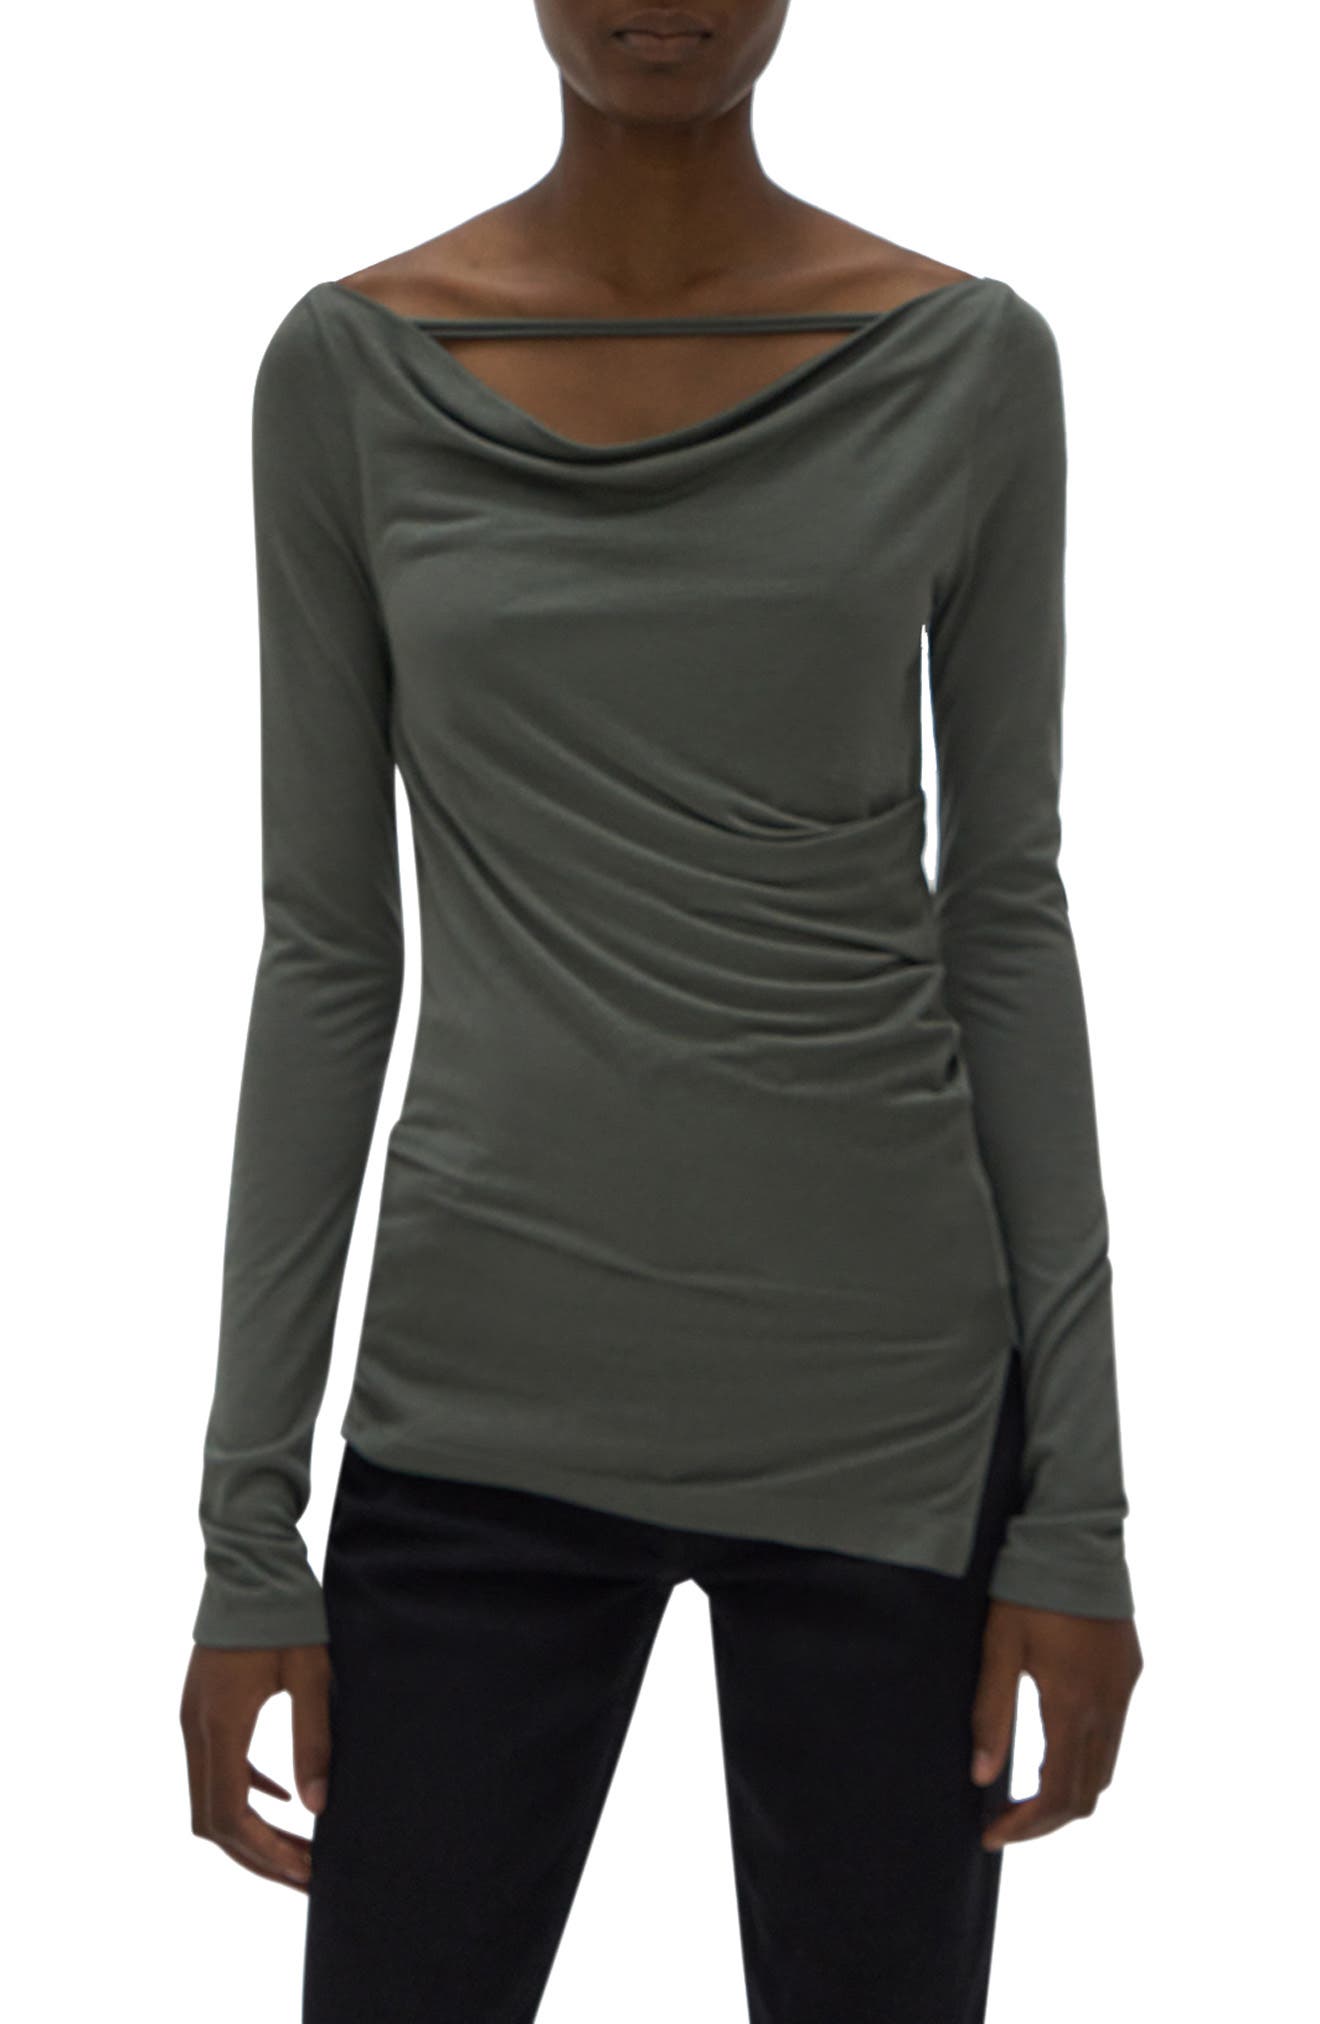 Helmut Lang Scala Ruched Off the Shoulder Tunic Top in Fog at Nordstrom, Size Small